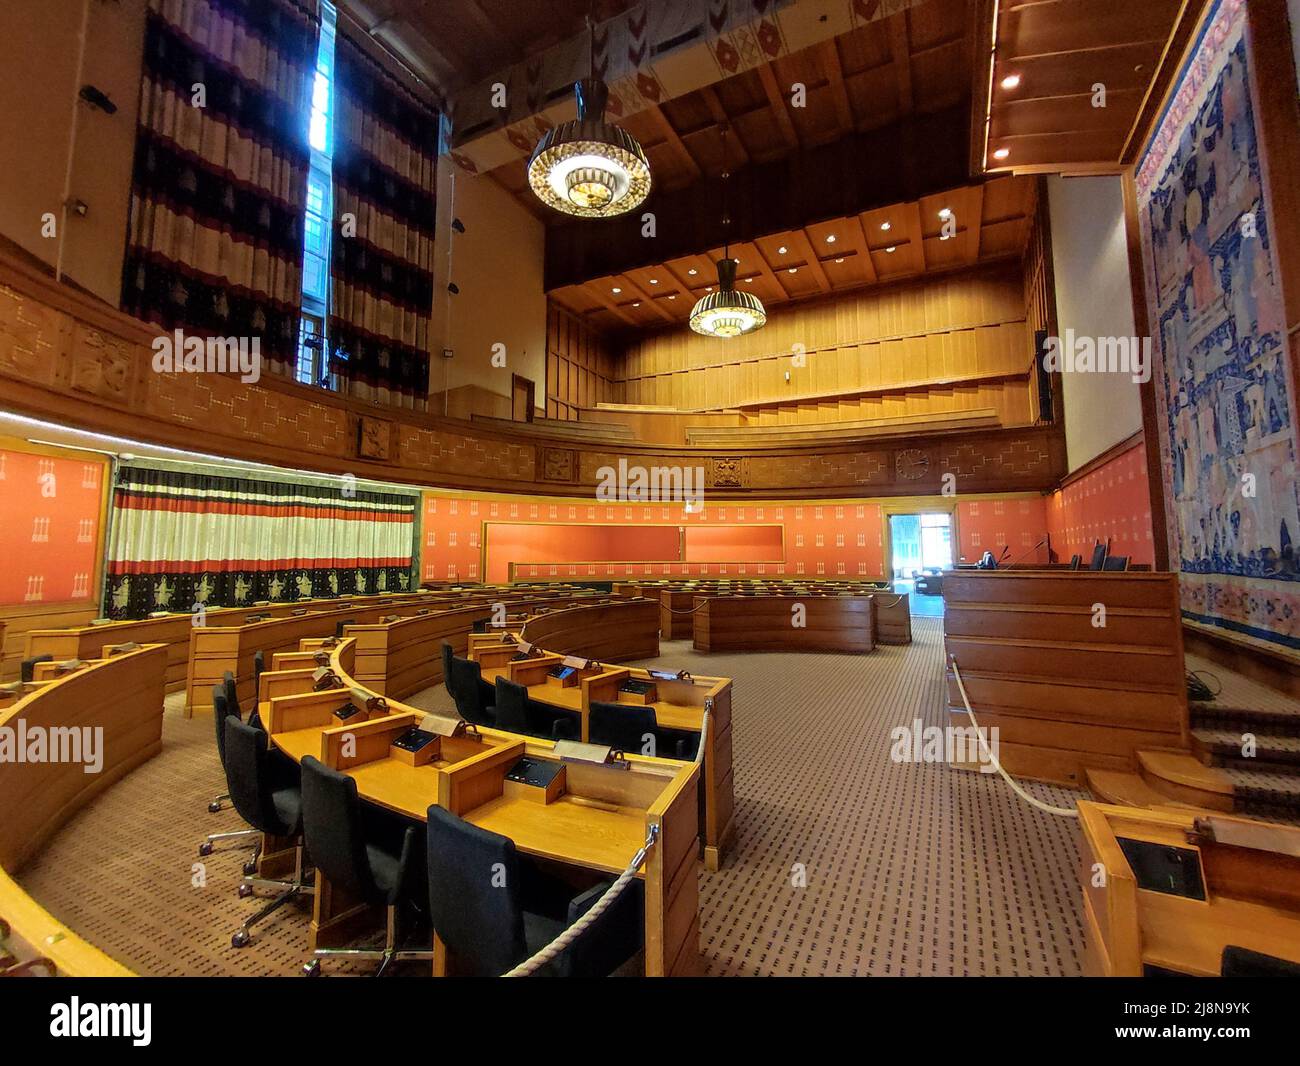 Oslo, Norway - 30 April 2022: The City Council Hall Stock Photo